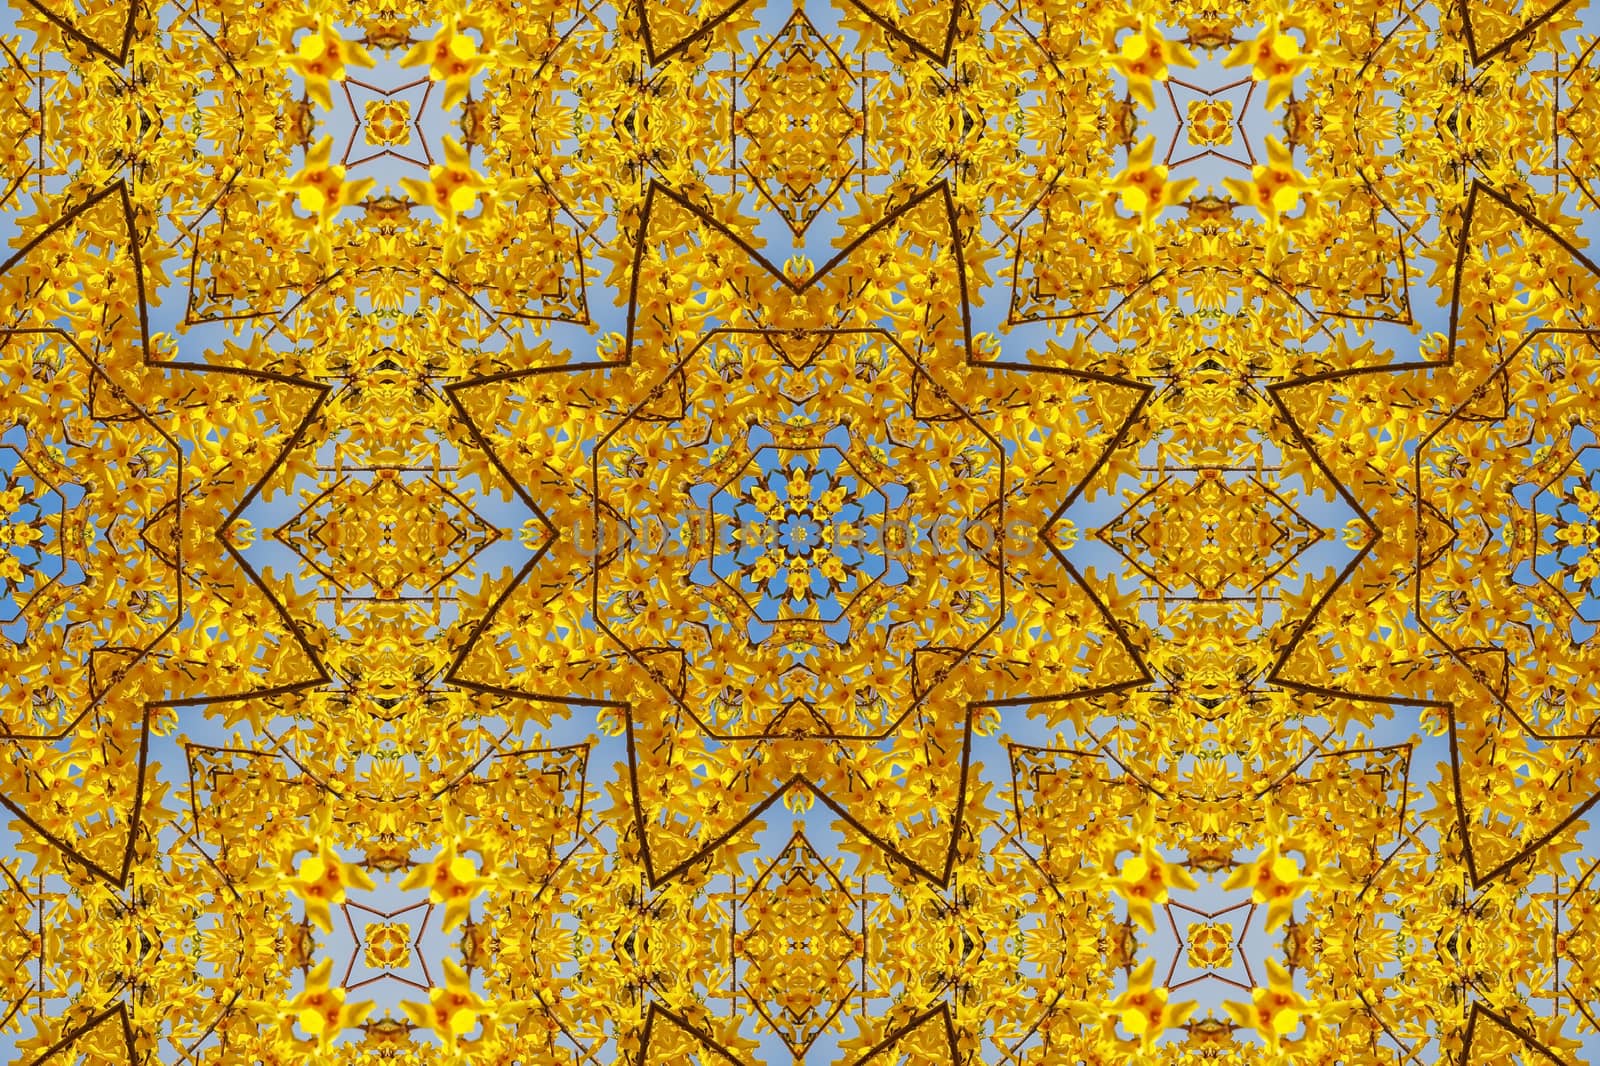 kaleidoscopic floral pattern, abstract background for design